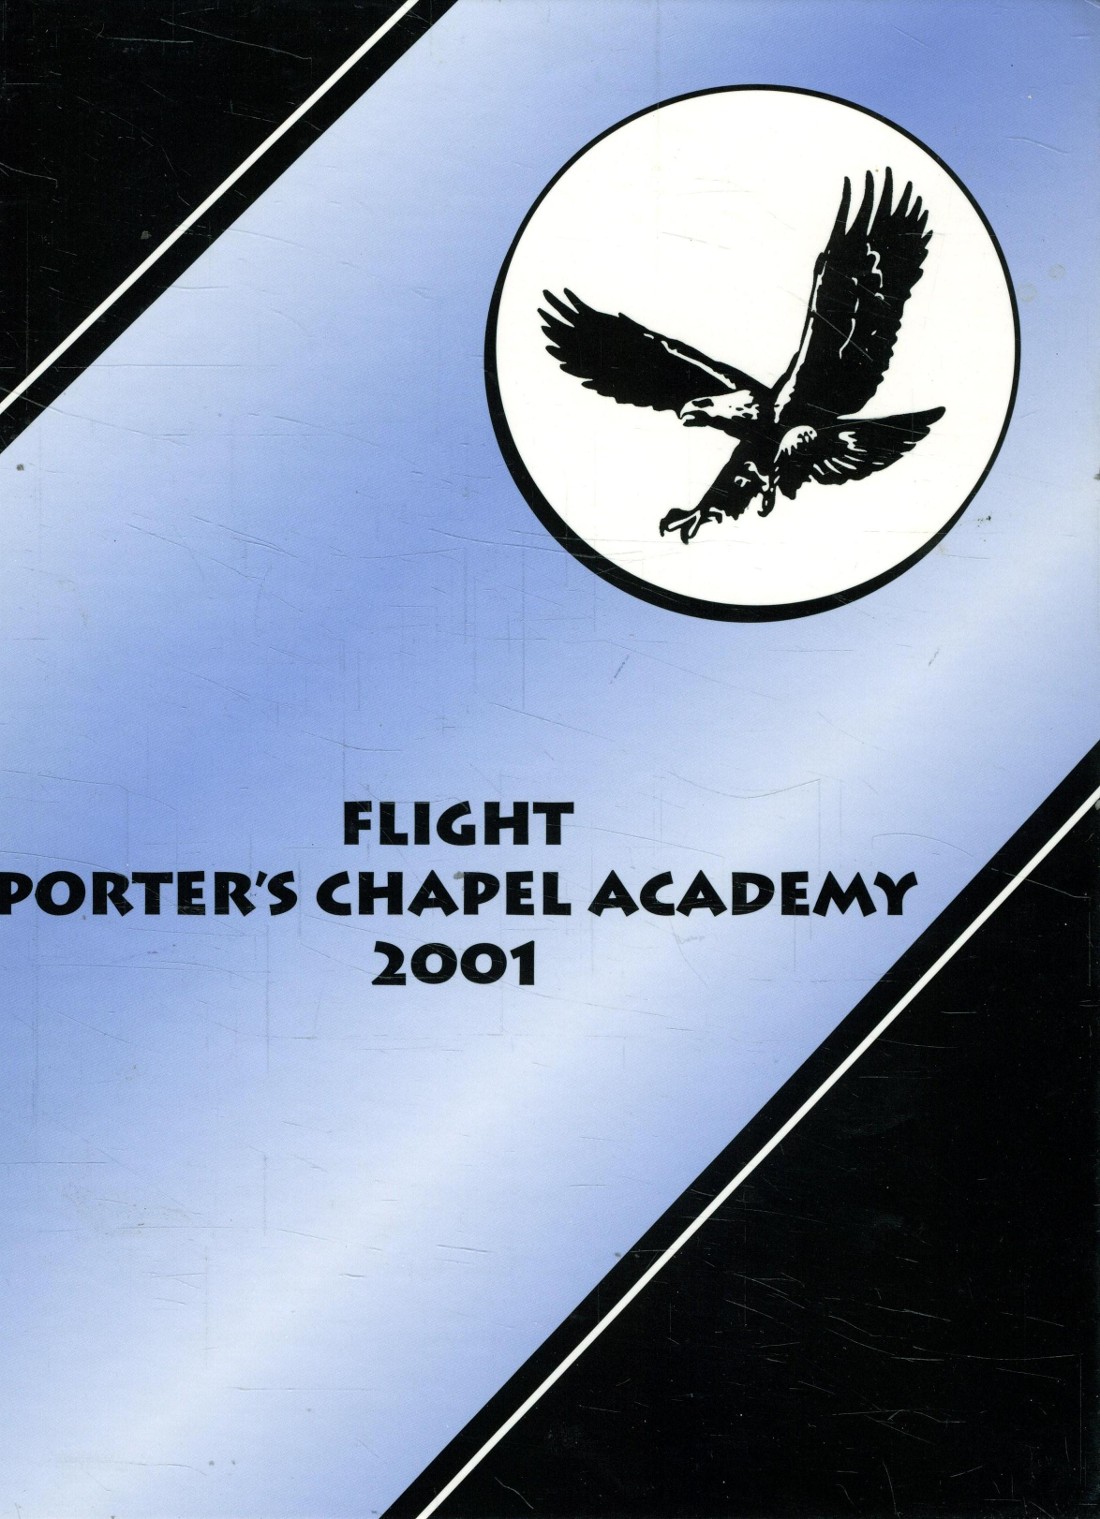 2001 yearbook from Porters Chapel Academy from Vicksburg, Mississippi